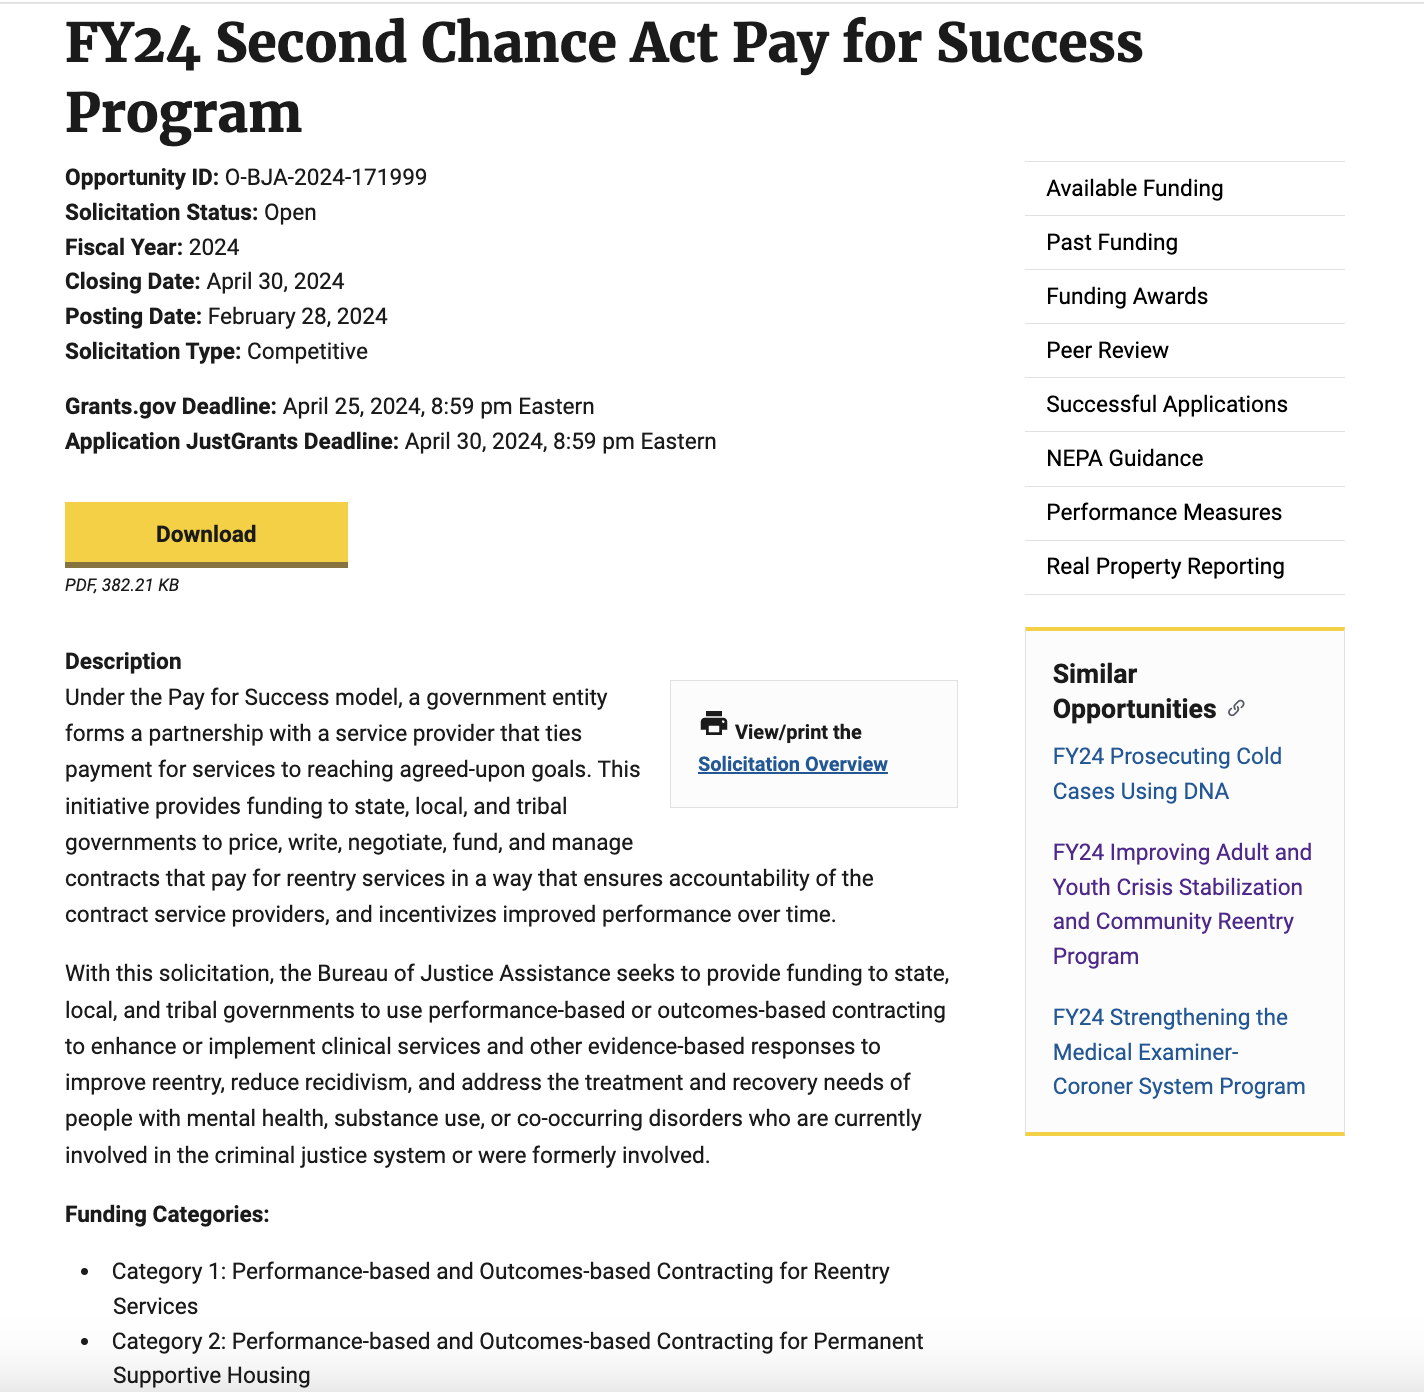 FY24 Second Chance Act Pay for Success Program